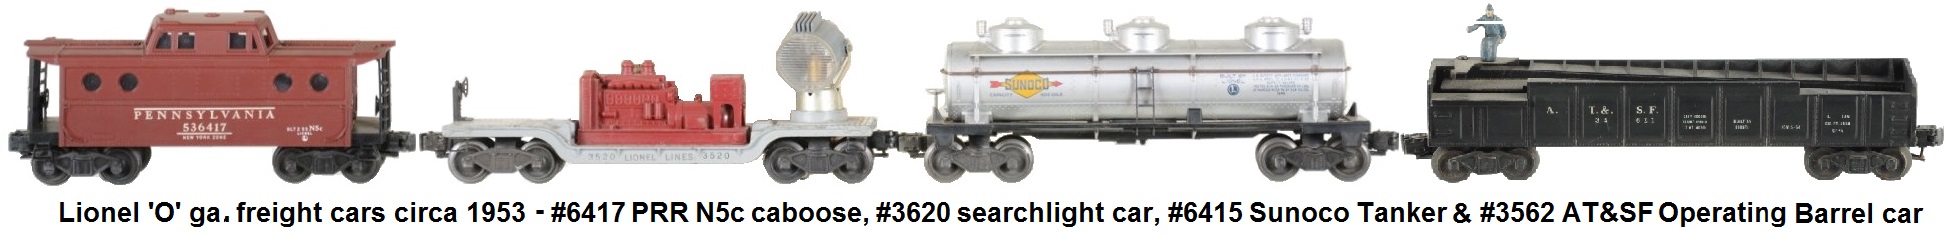 Lionel 'O' gauge freight cars circa 1953 with #6417 PRR N5c caboose, #3620 operating searchlight car, #6415 Sunoco tank car, and #2562-1 Operating Barrel Car